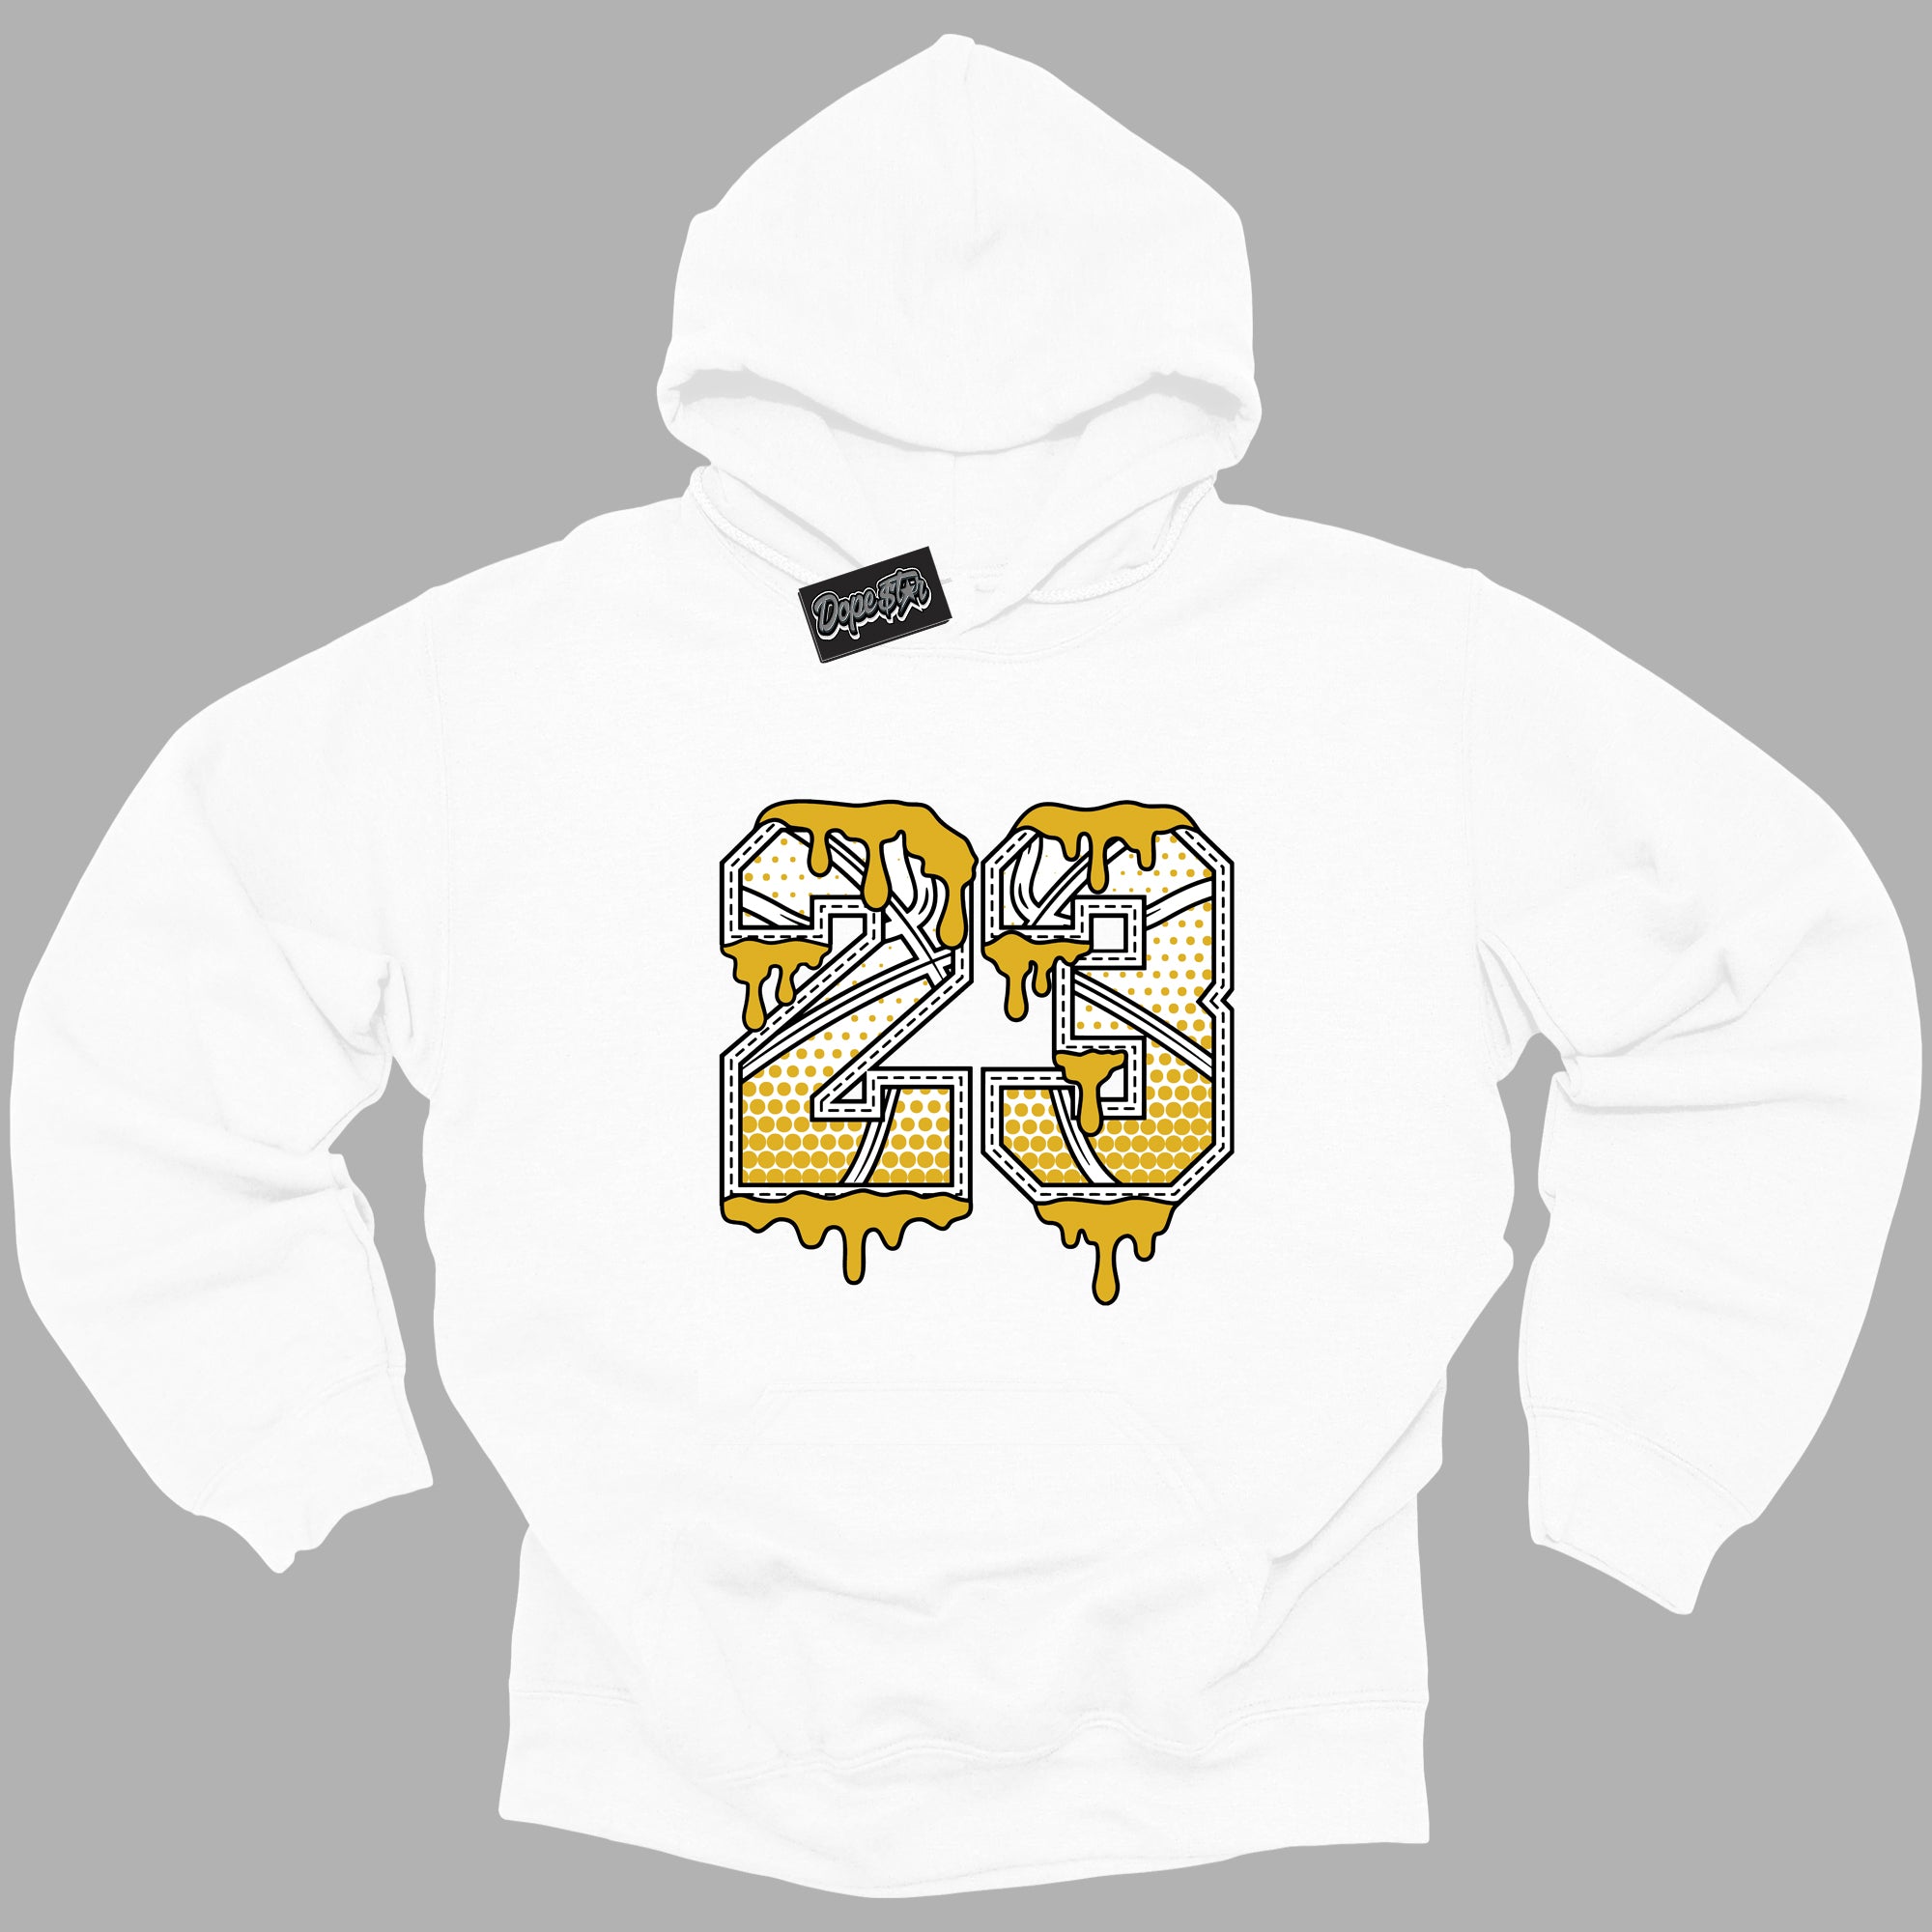 Cool White Hoodie with “ 23 Ball ”  design that Perfectly Matches Yellow Ochre 6s Sneakers.